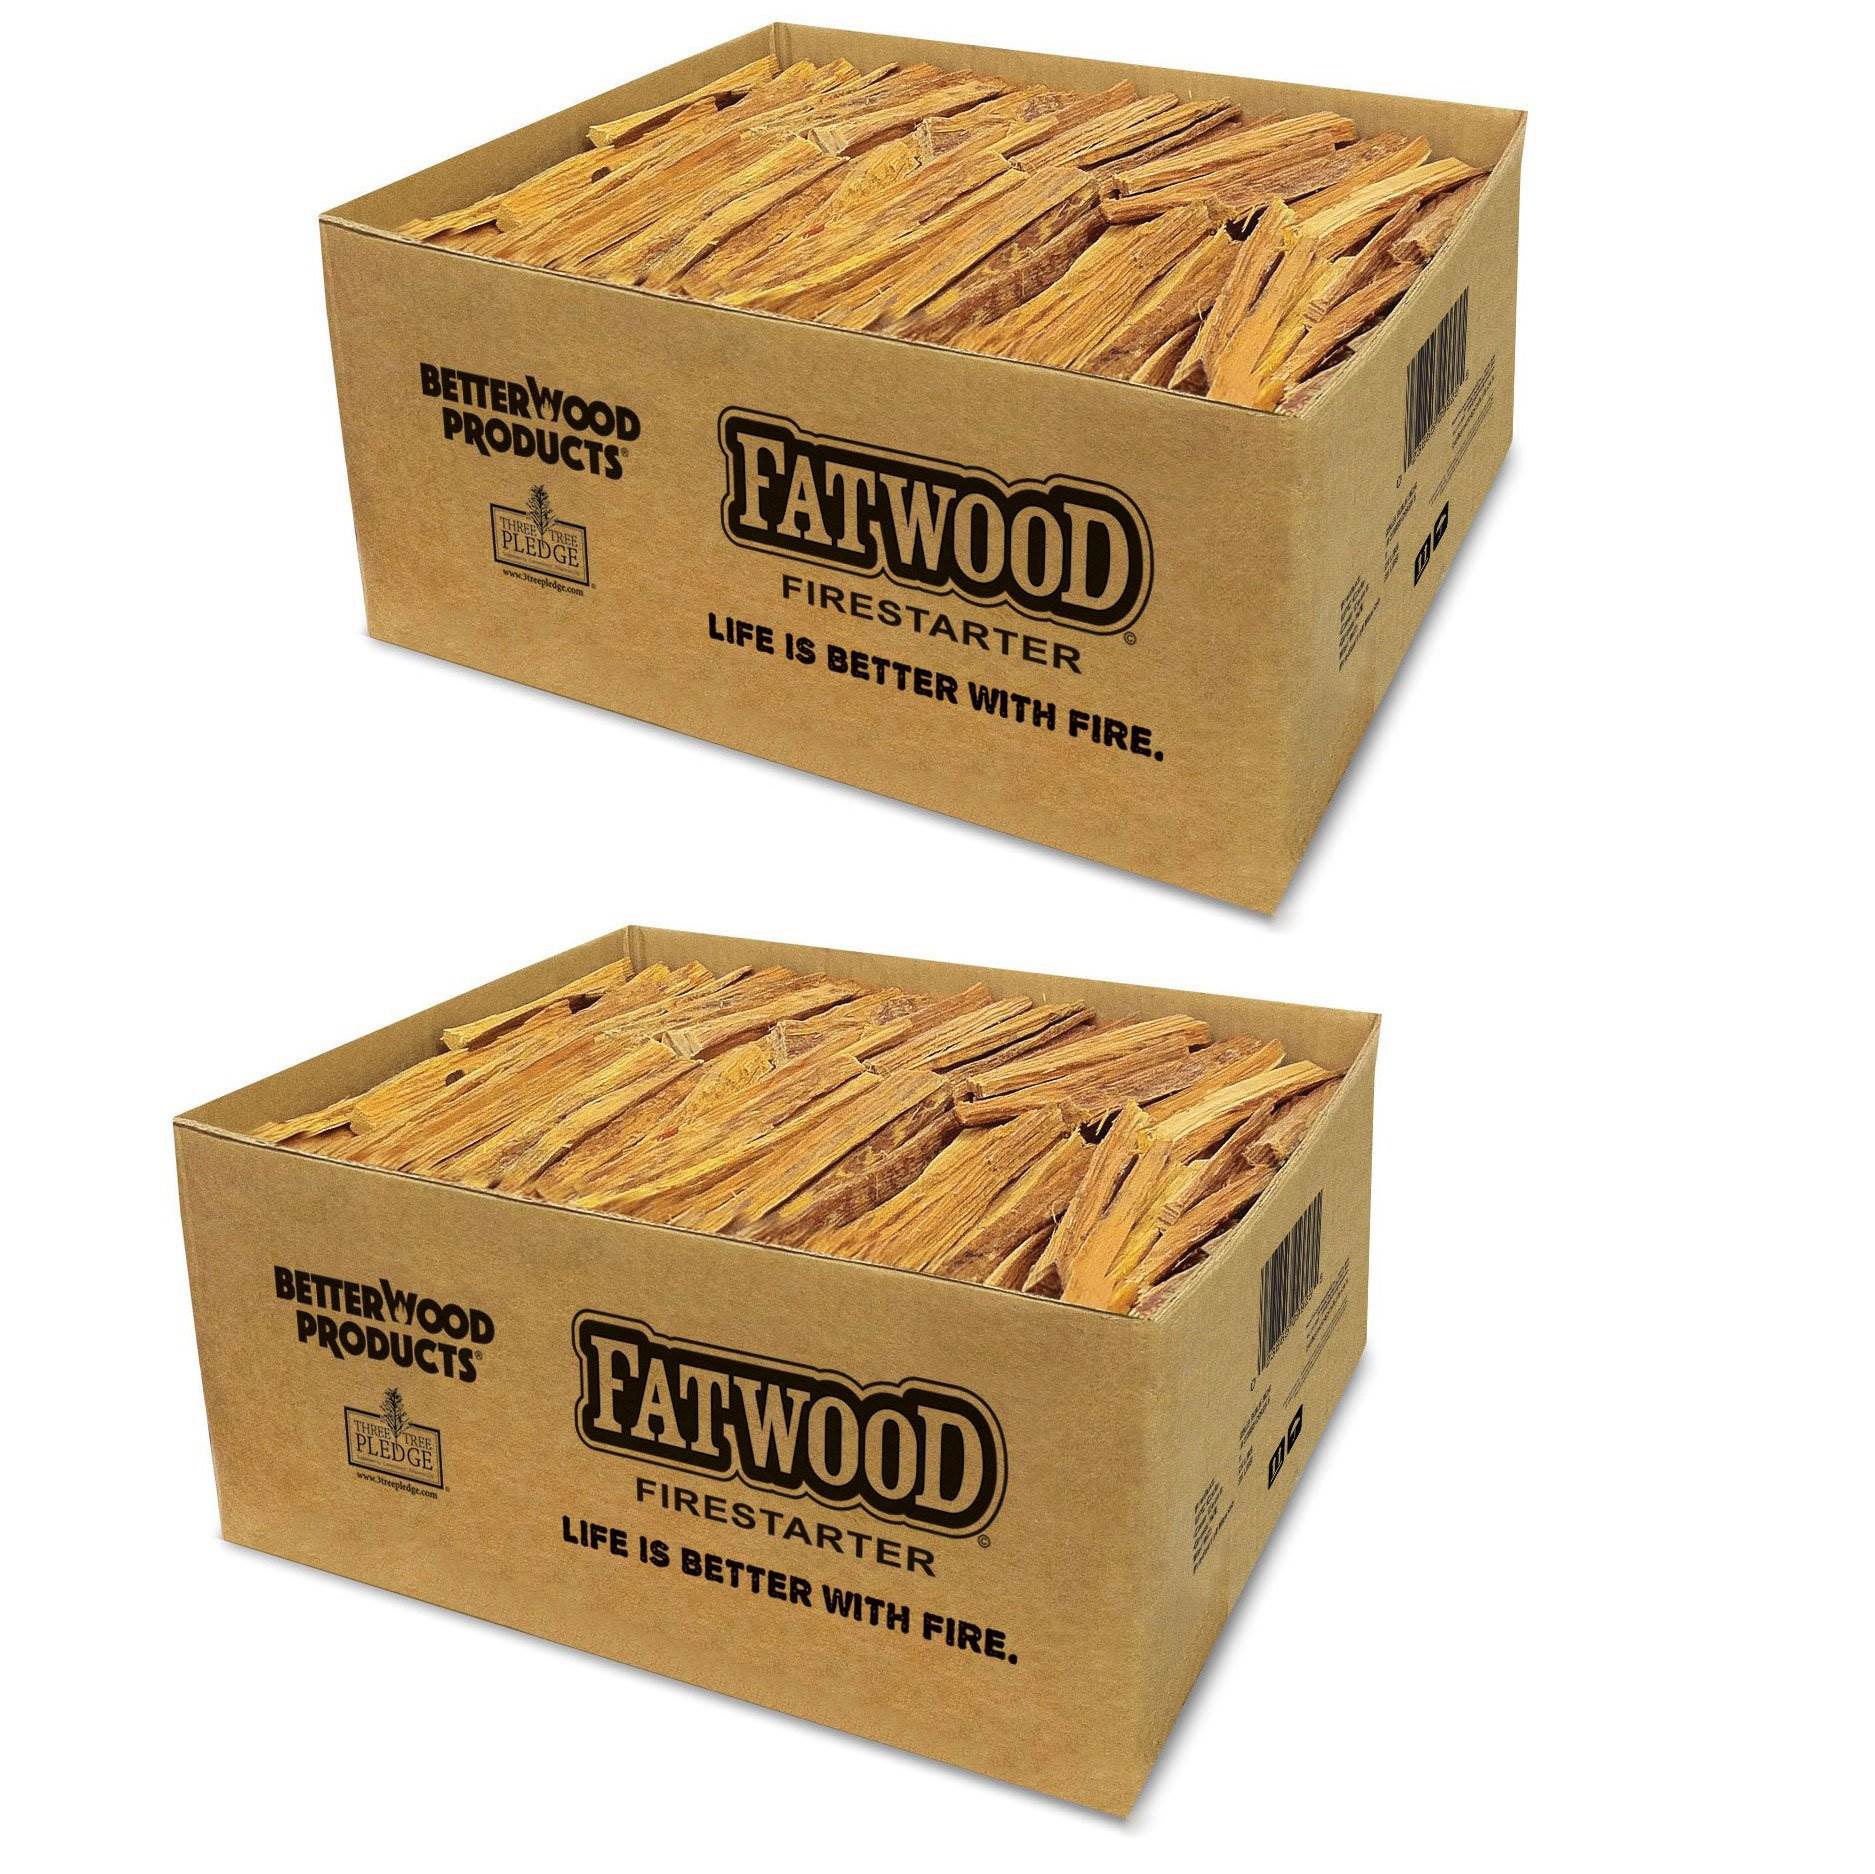 Better Wood Products Fatwood Firestarter Box 2-Pounds